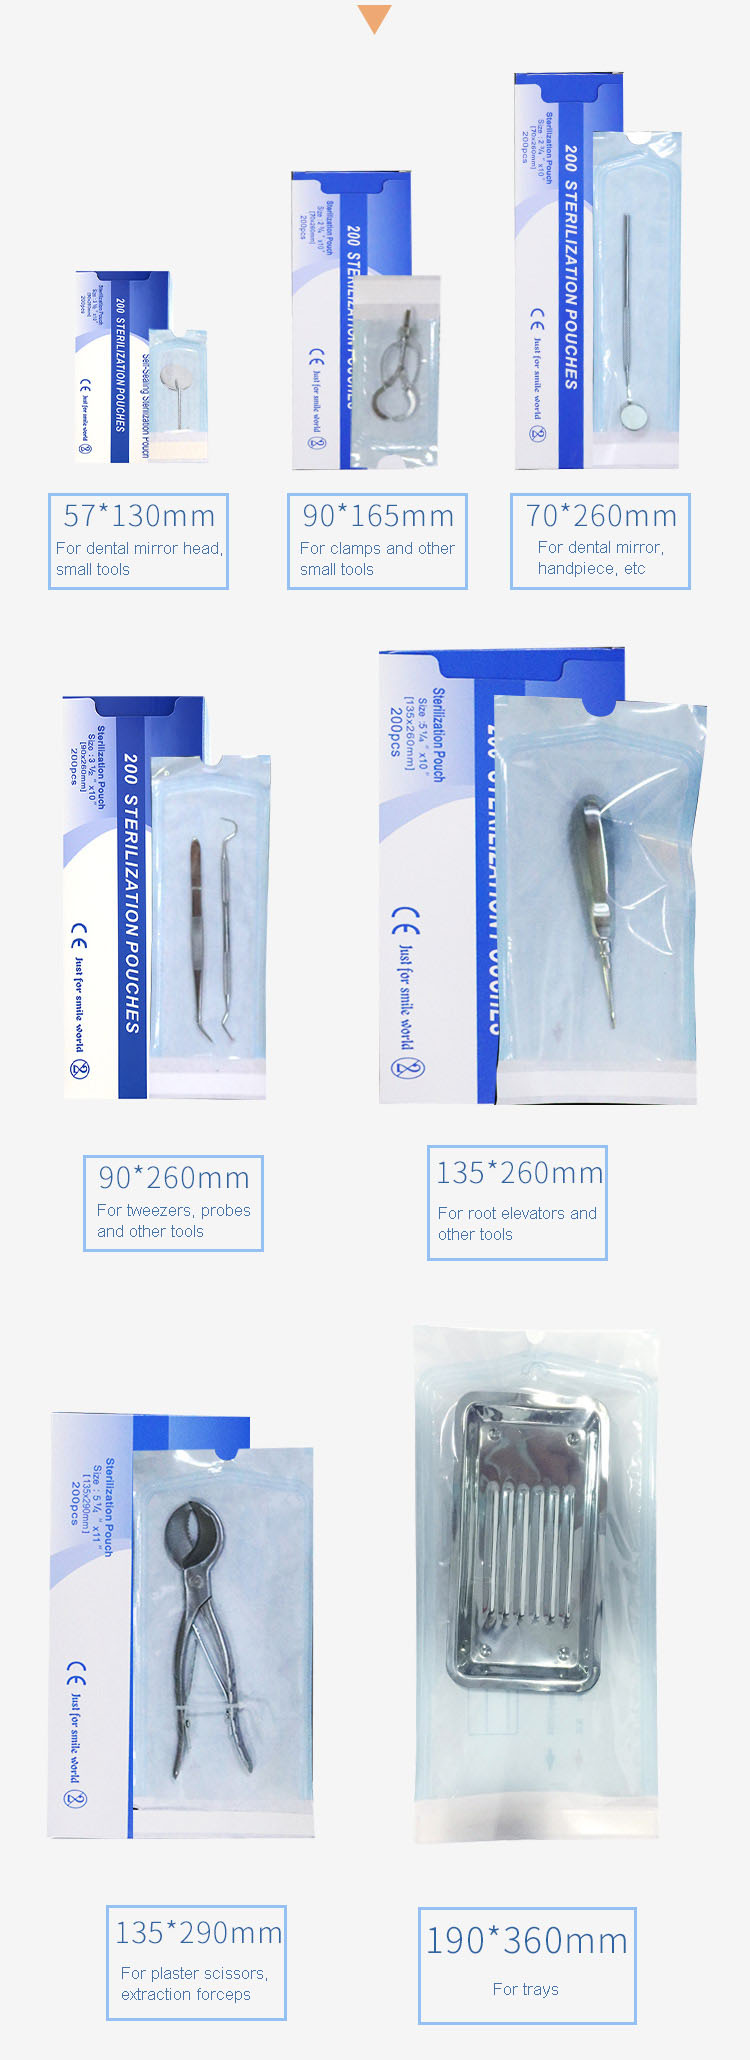 size of dental sterilization pouches and application